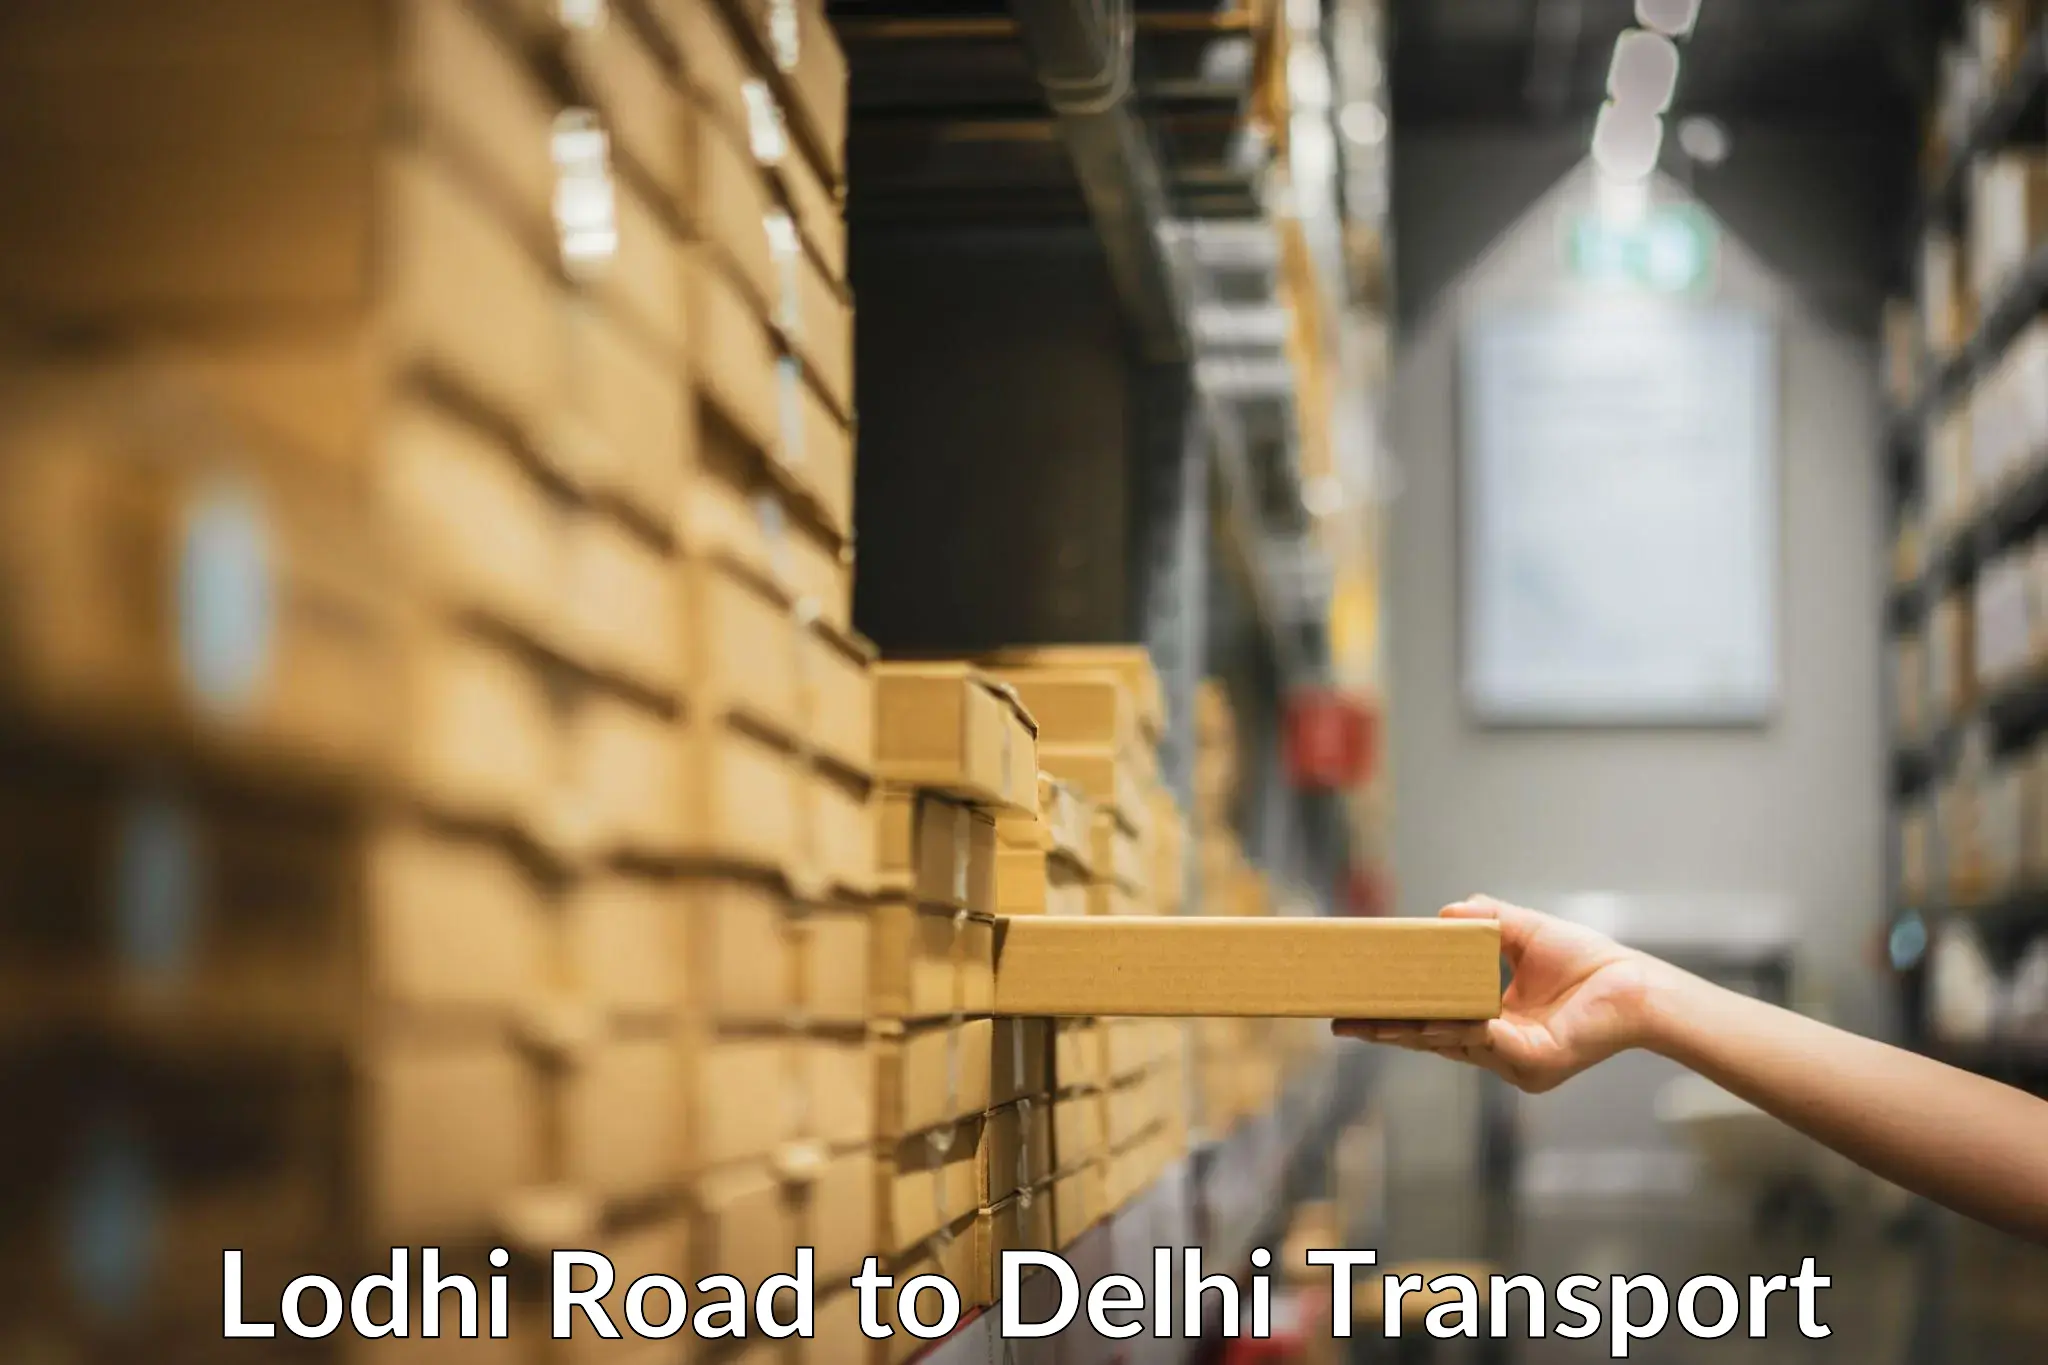 Express transport services Lodhi Road to Lodhi Road